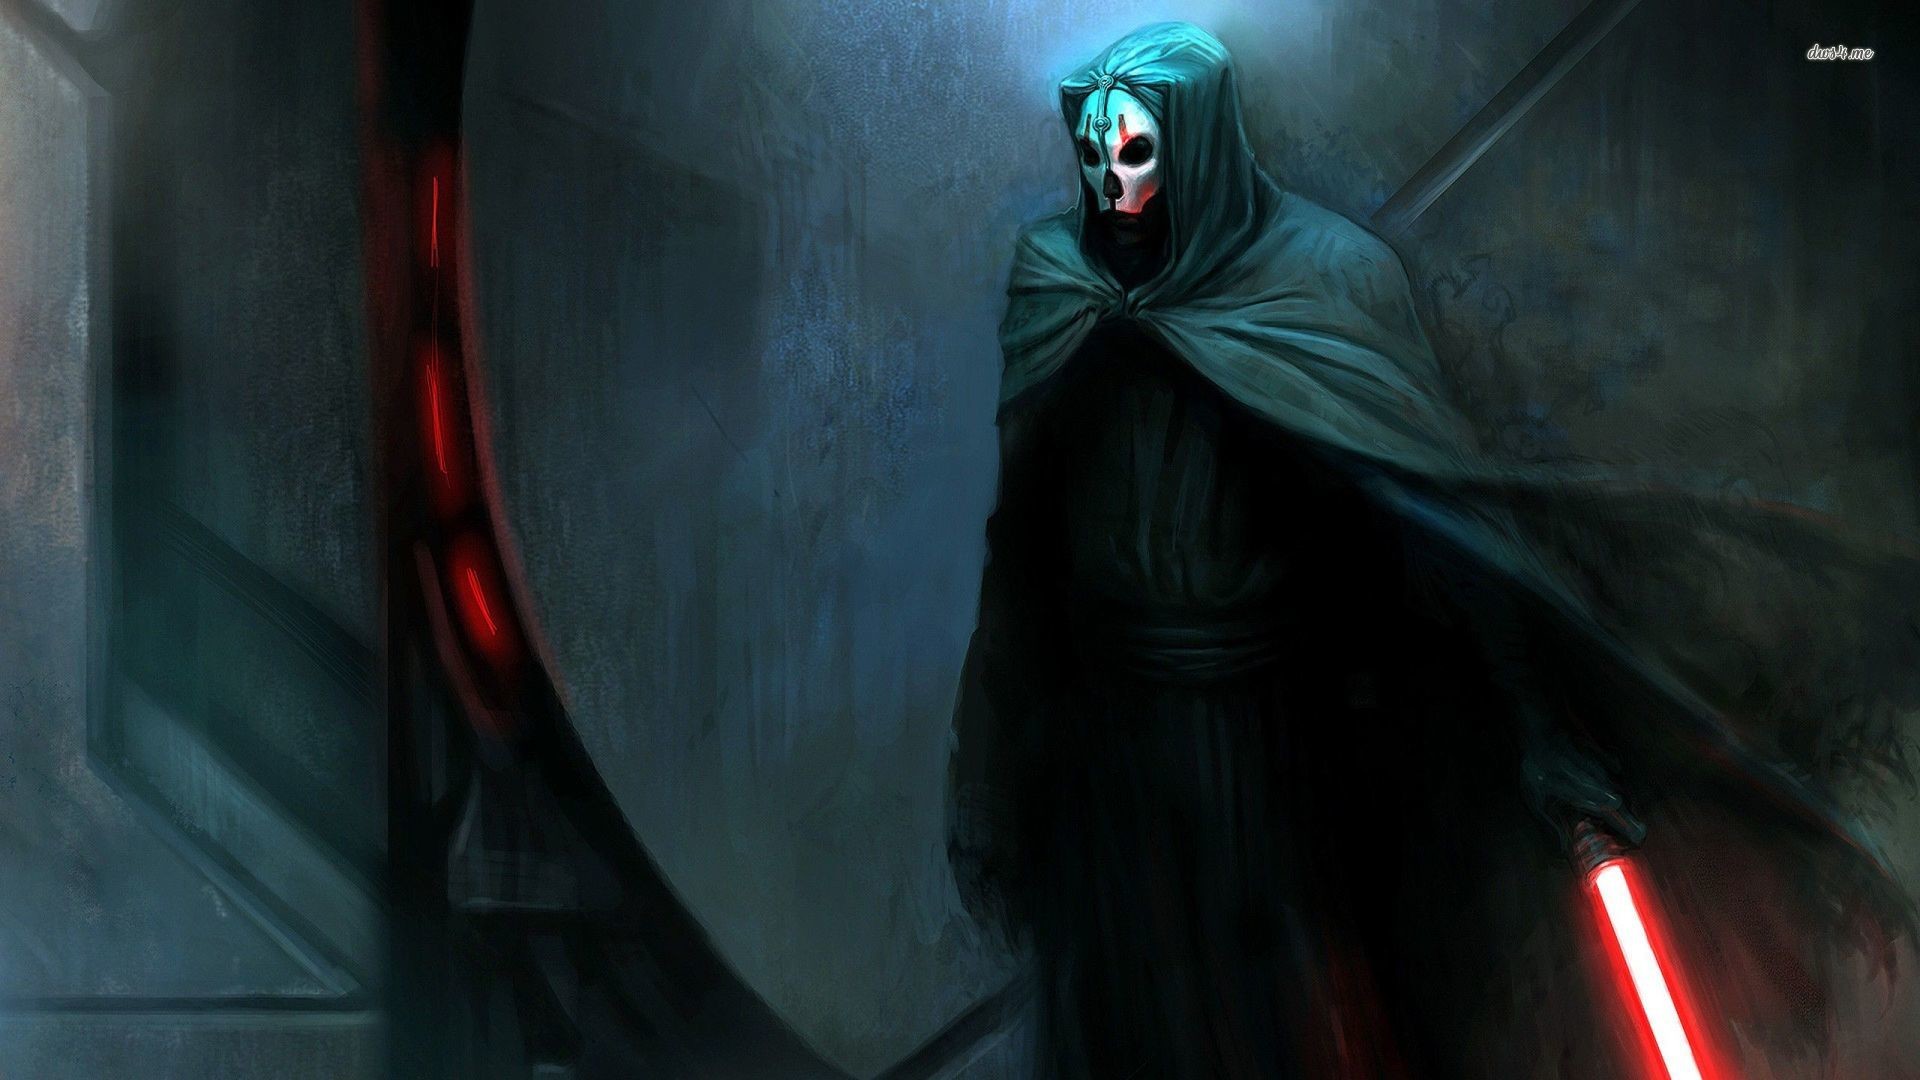 1920x1080  Star Wars: Knights of the Old Republic II – The Sith Lords  Wallpaper .